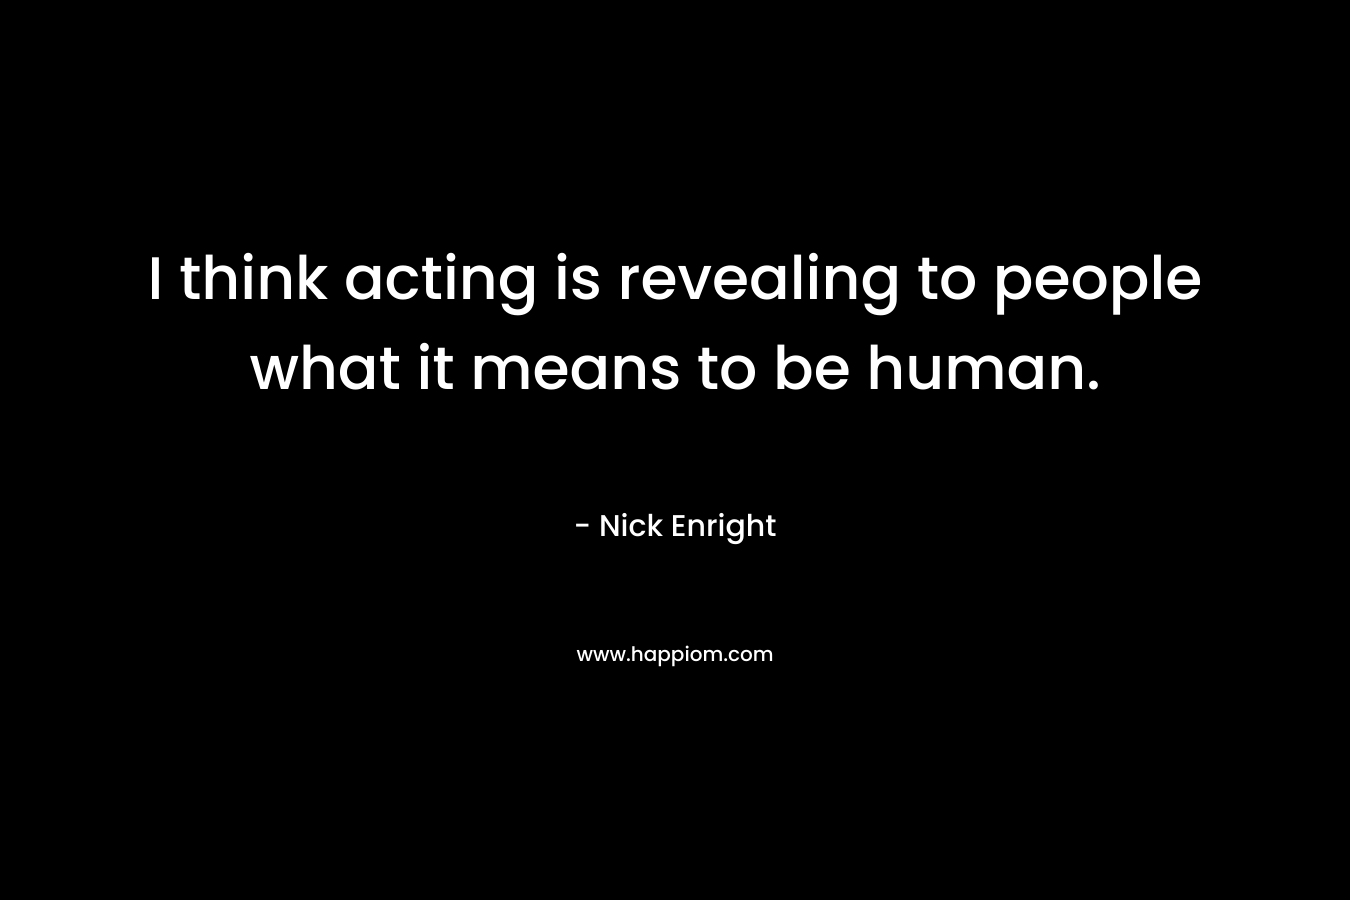 I think acting is revealing to people what it means to be human. – Nick Enright